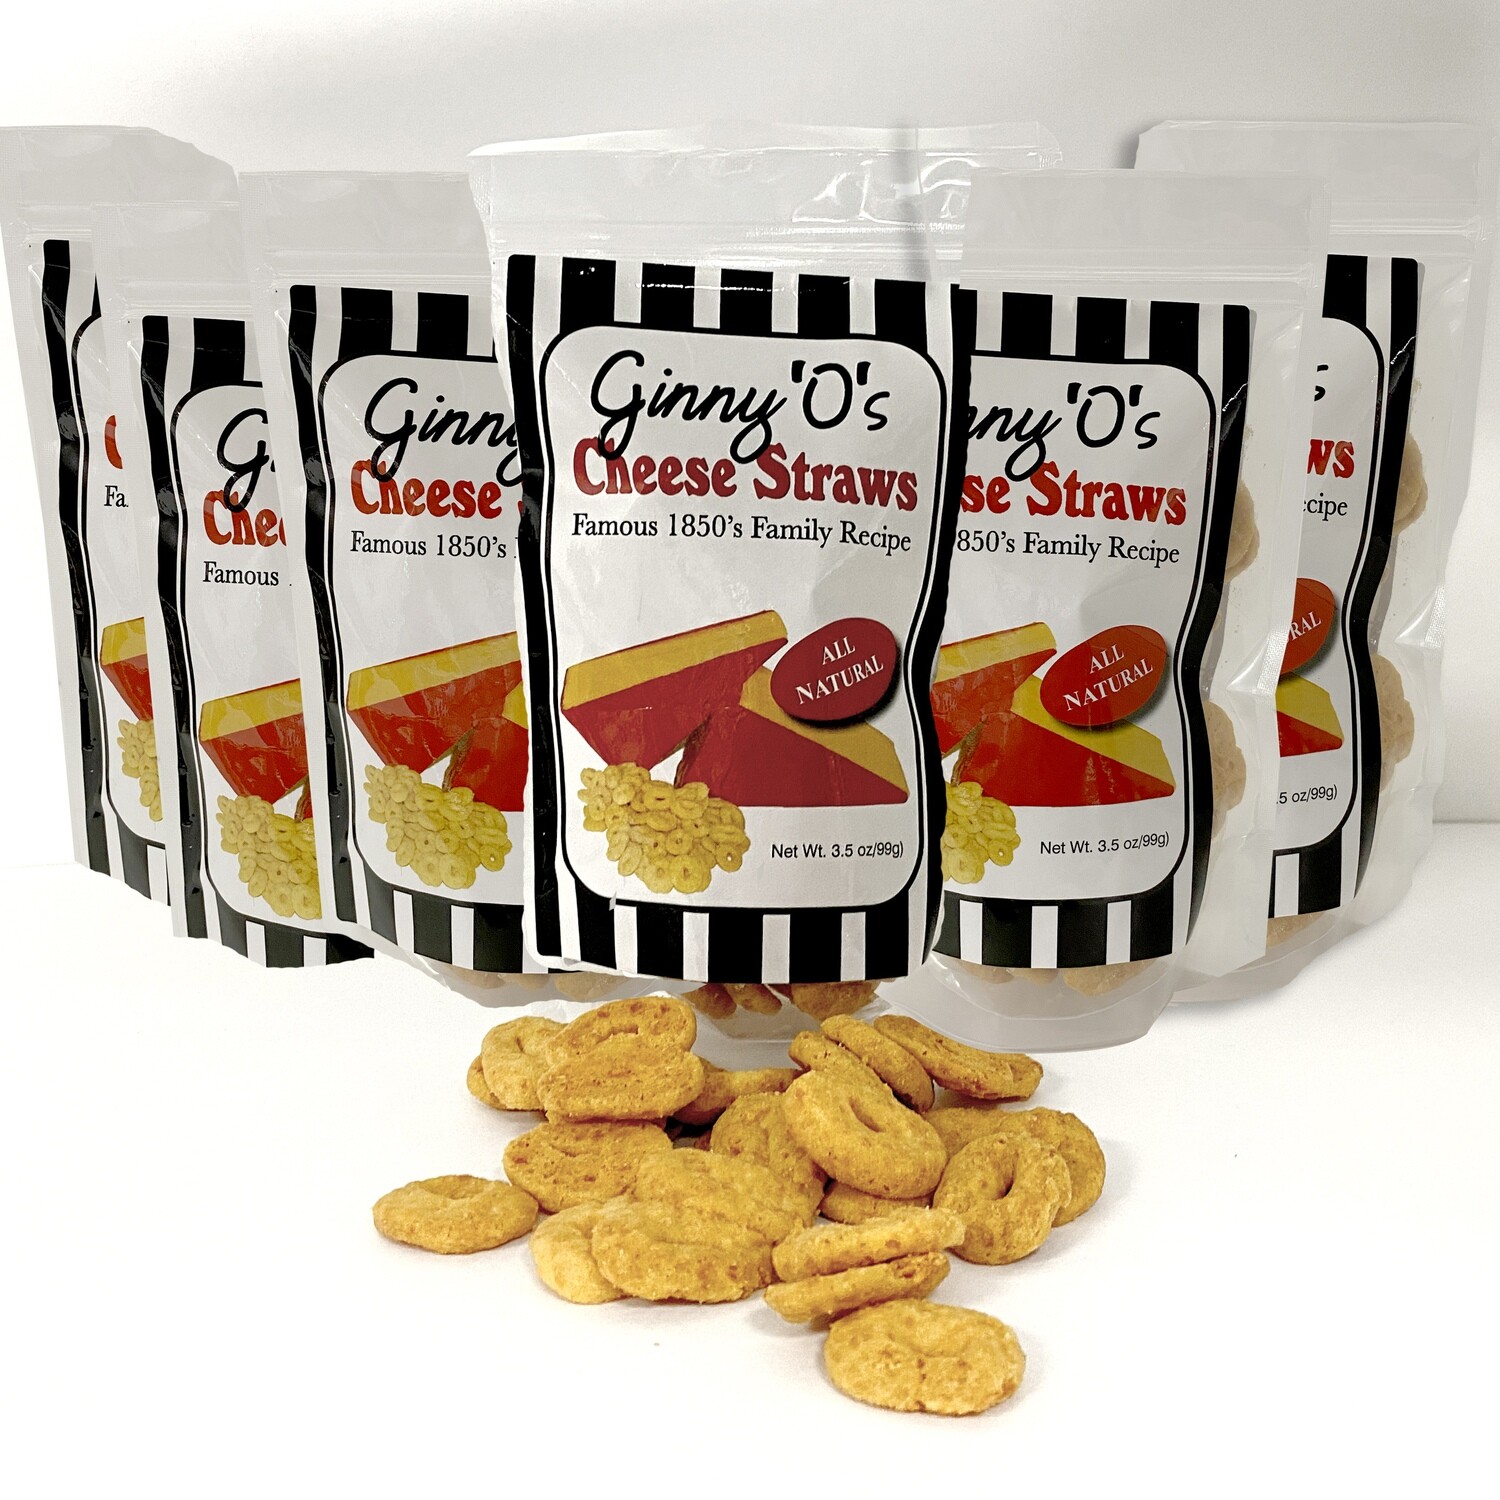 6 Packages of 3.5 oz Original Ginny O’s Cheese Straws